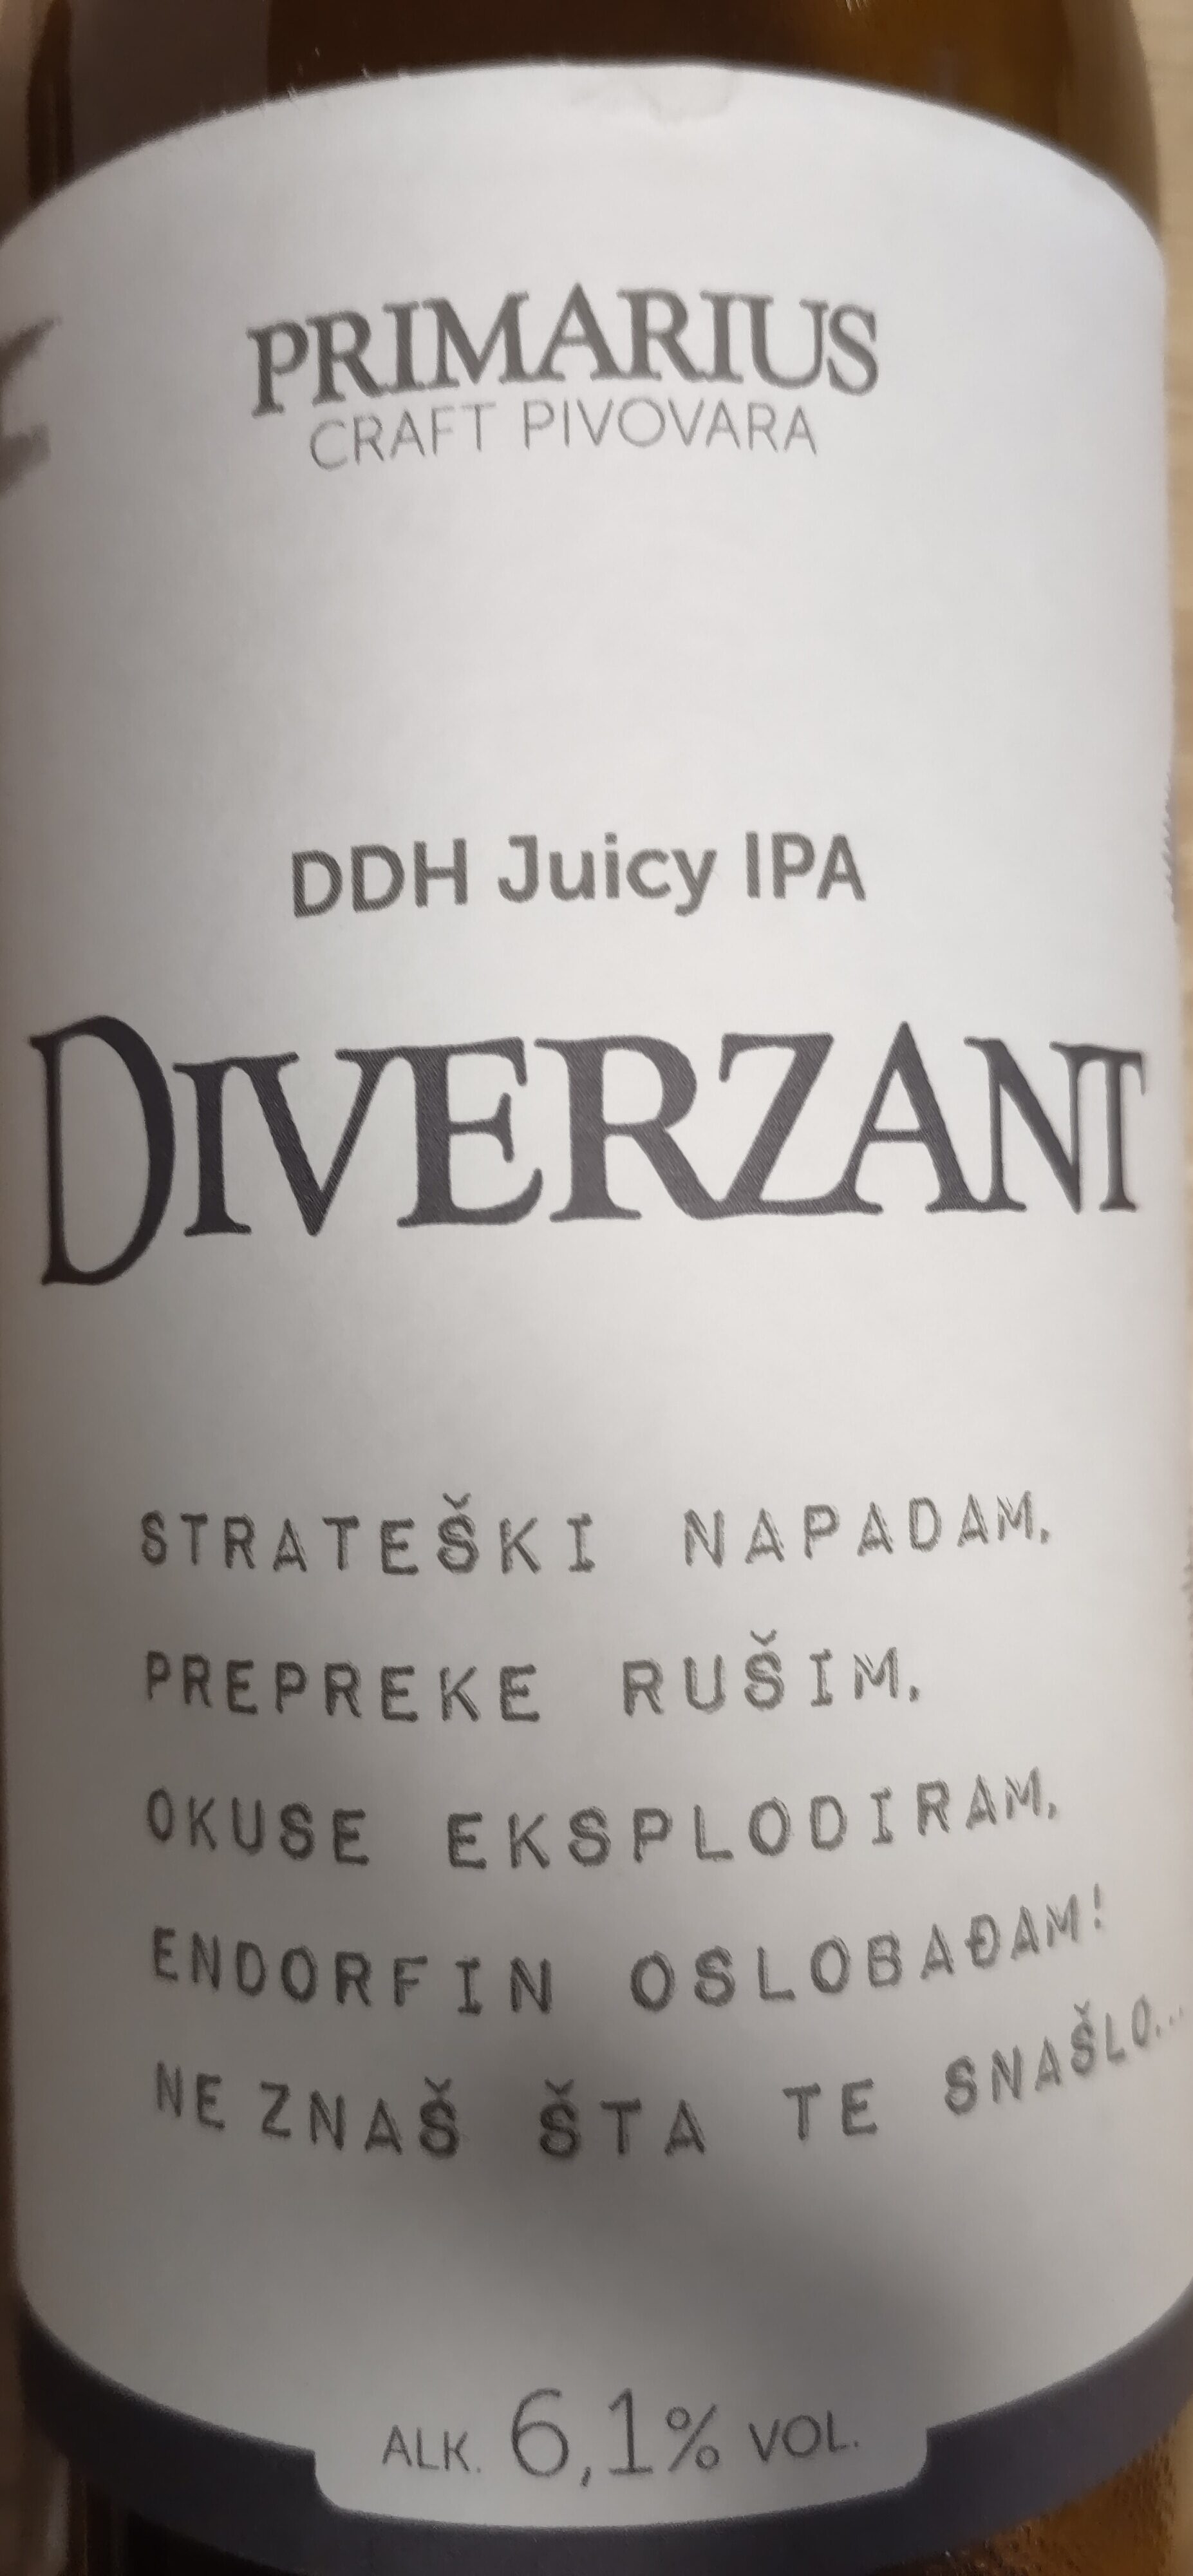 ddh Juicy IPA Diverzant - Product - hr